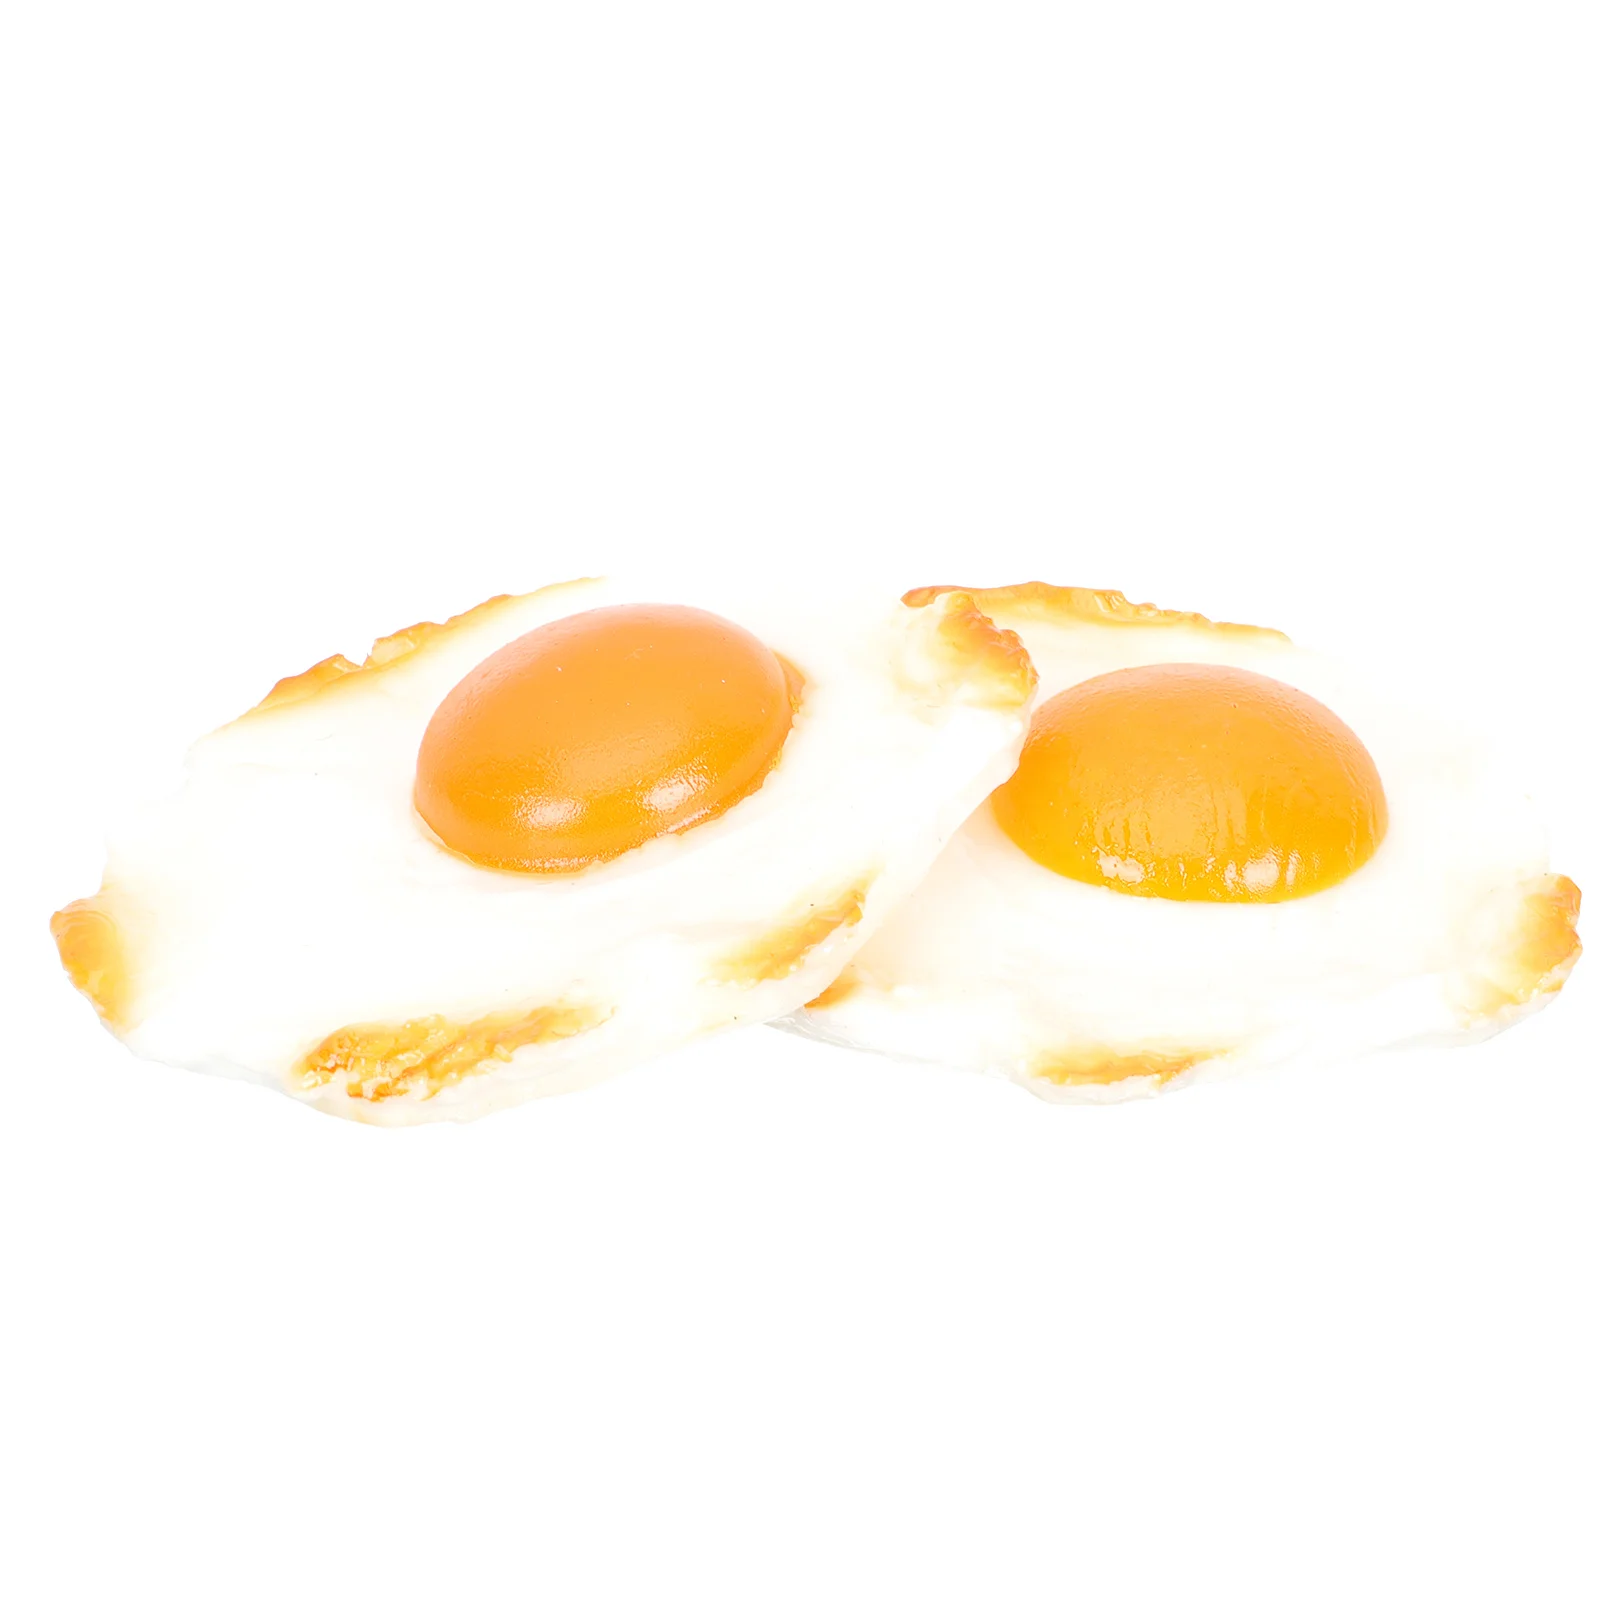 

2 Pcs Simulated Omelette Decor Simulation Fried Egg Photo Prop Layout Scene Fake Food Model Props Pvc Child Artificial